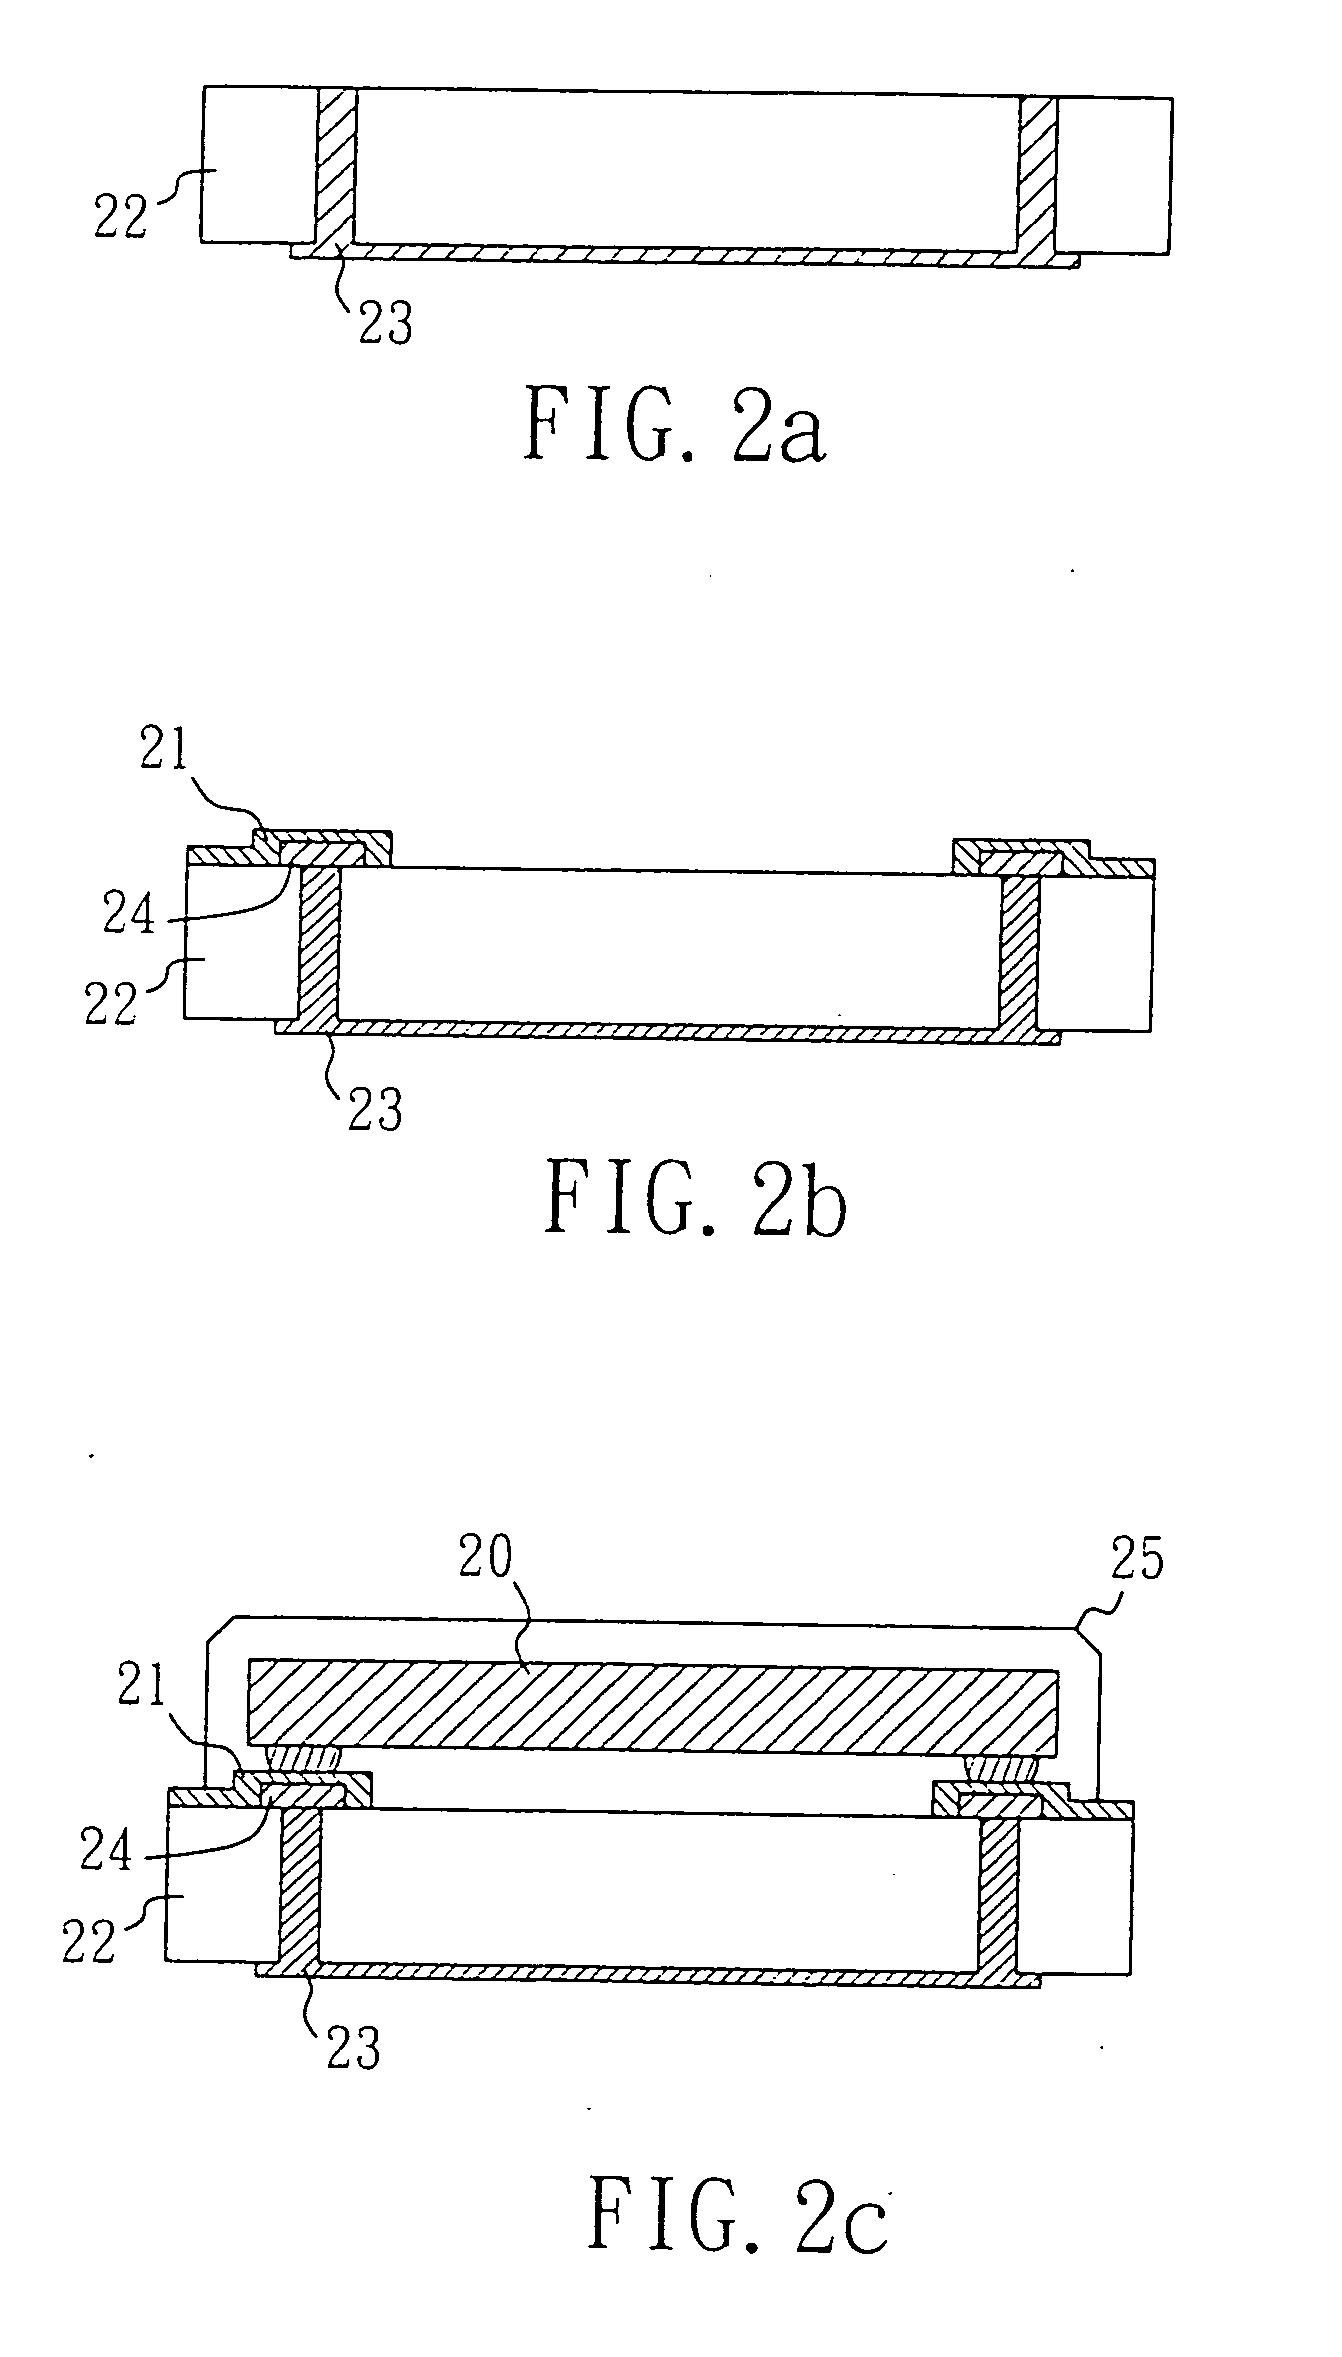 Ball grid array IC substrate with over voltage protection function